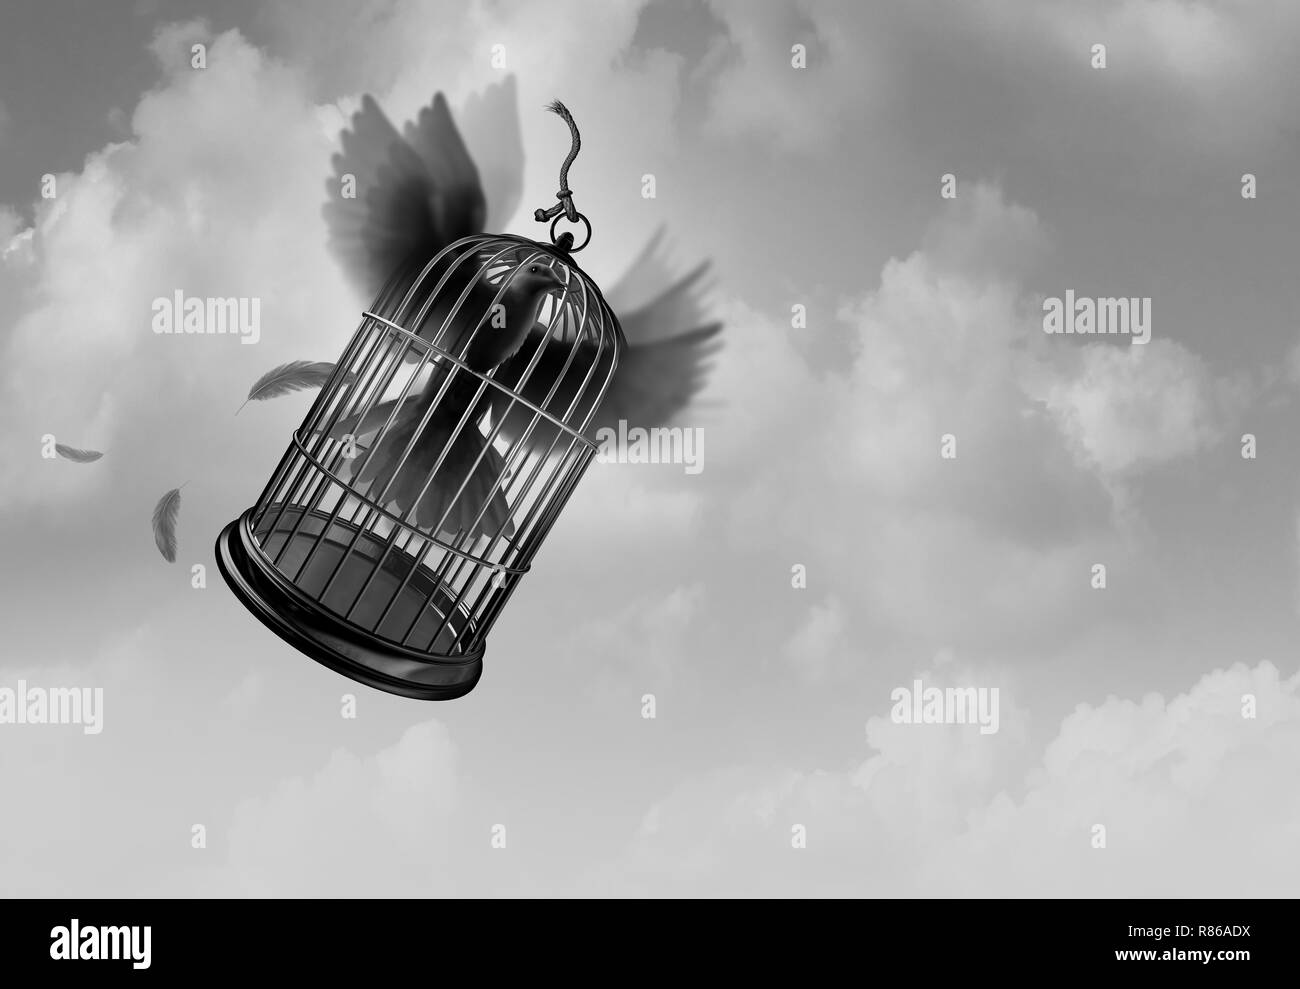 Unleash the power of freedom idea with a determined powerful bird flying and lifting a birdcage while inside as an amazing surreal concept. Stock Photo